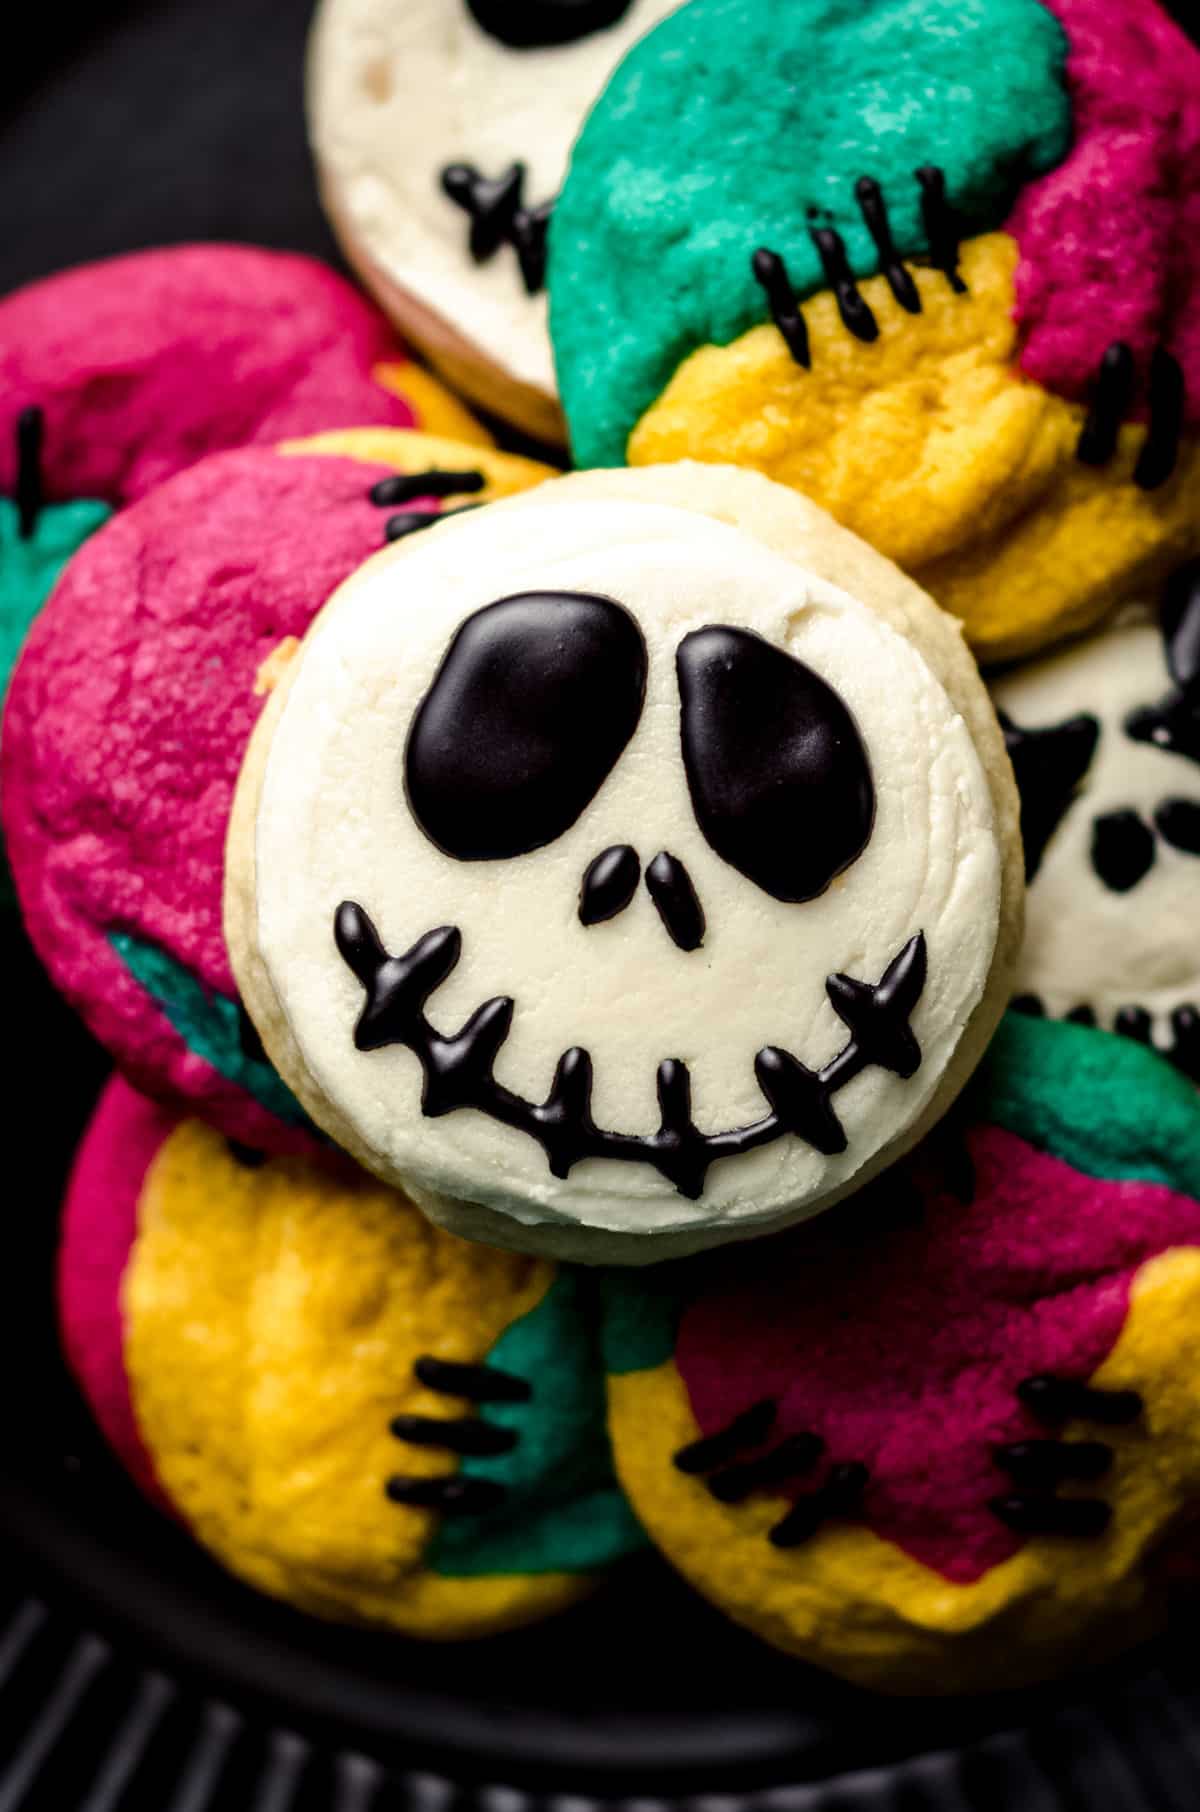 jack skellington cookies on a plate with sally stitches cookies